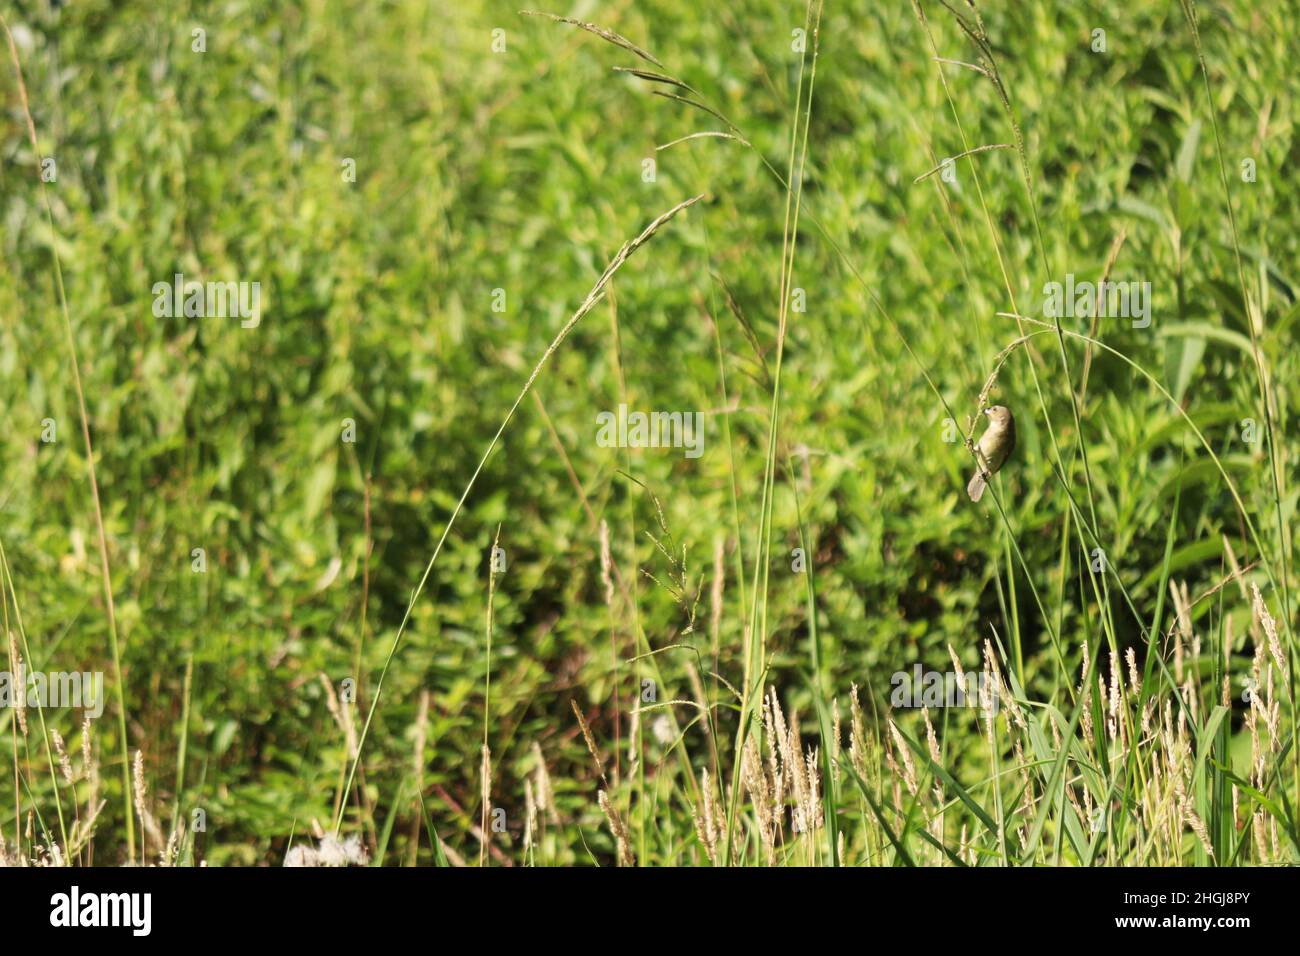 The sway of the little bird that landed on a thin stalk of grass. Balance, mastery and knowledge. Stock Photo